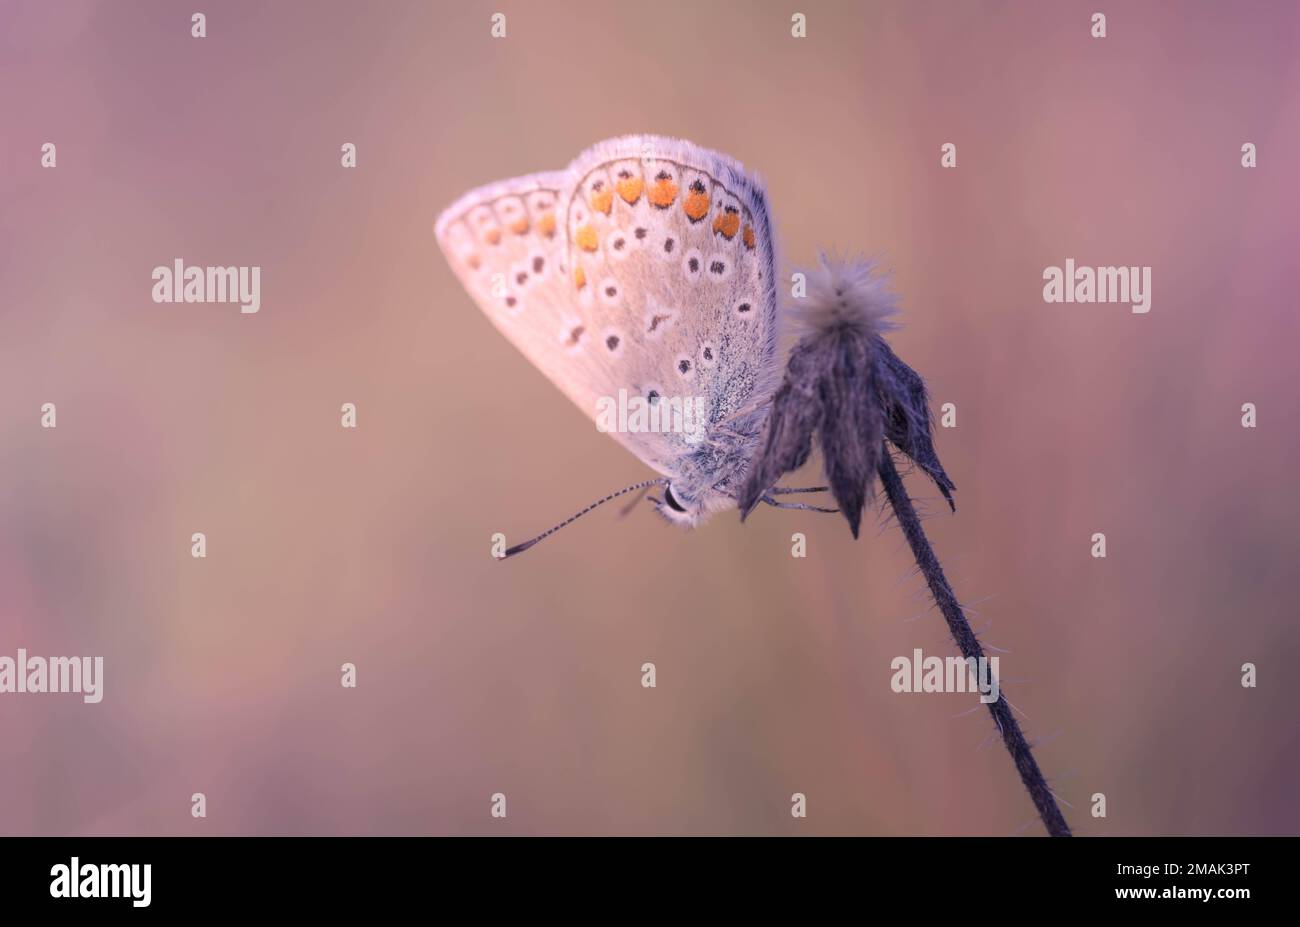 Close-up of a Lycaenidae butterfly sitting on a wildflower with a blurred background Stock Photo